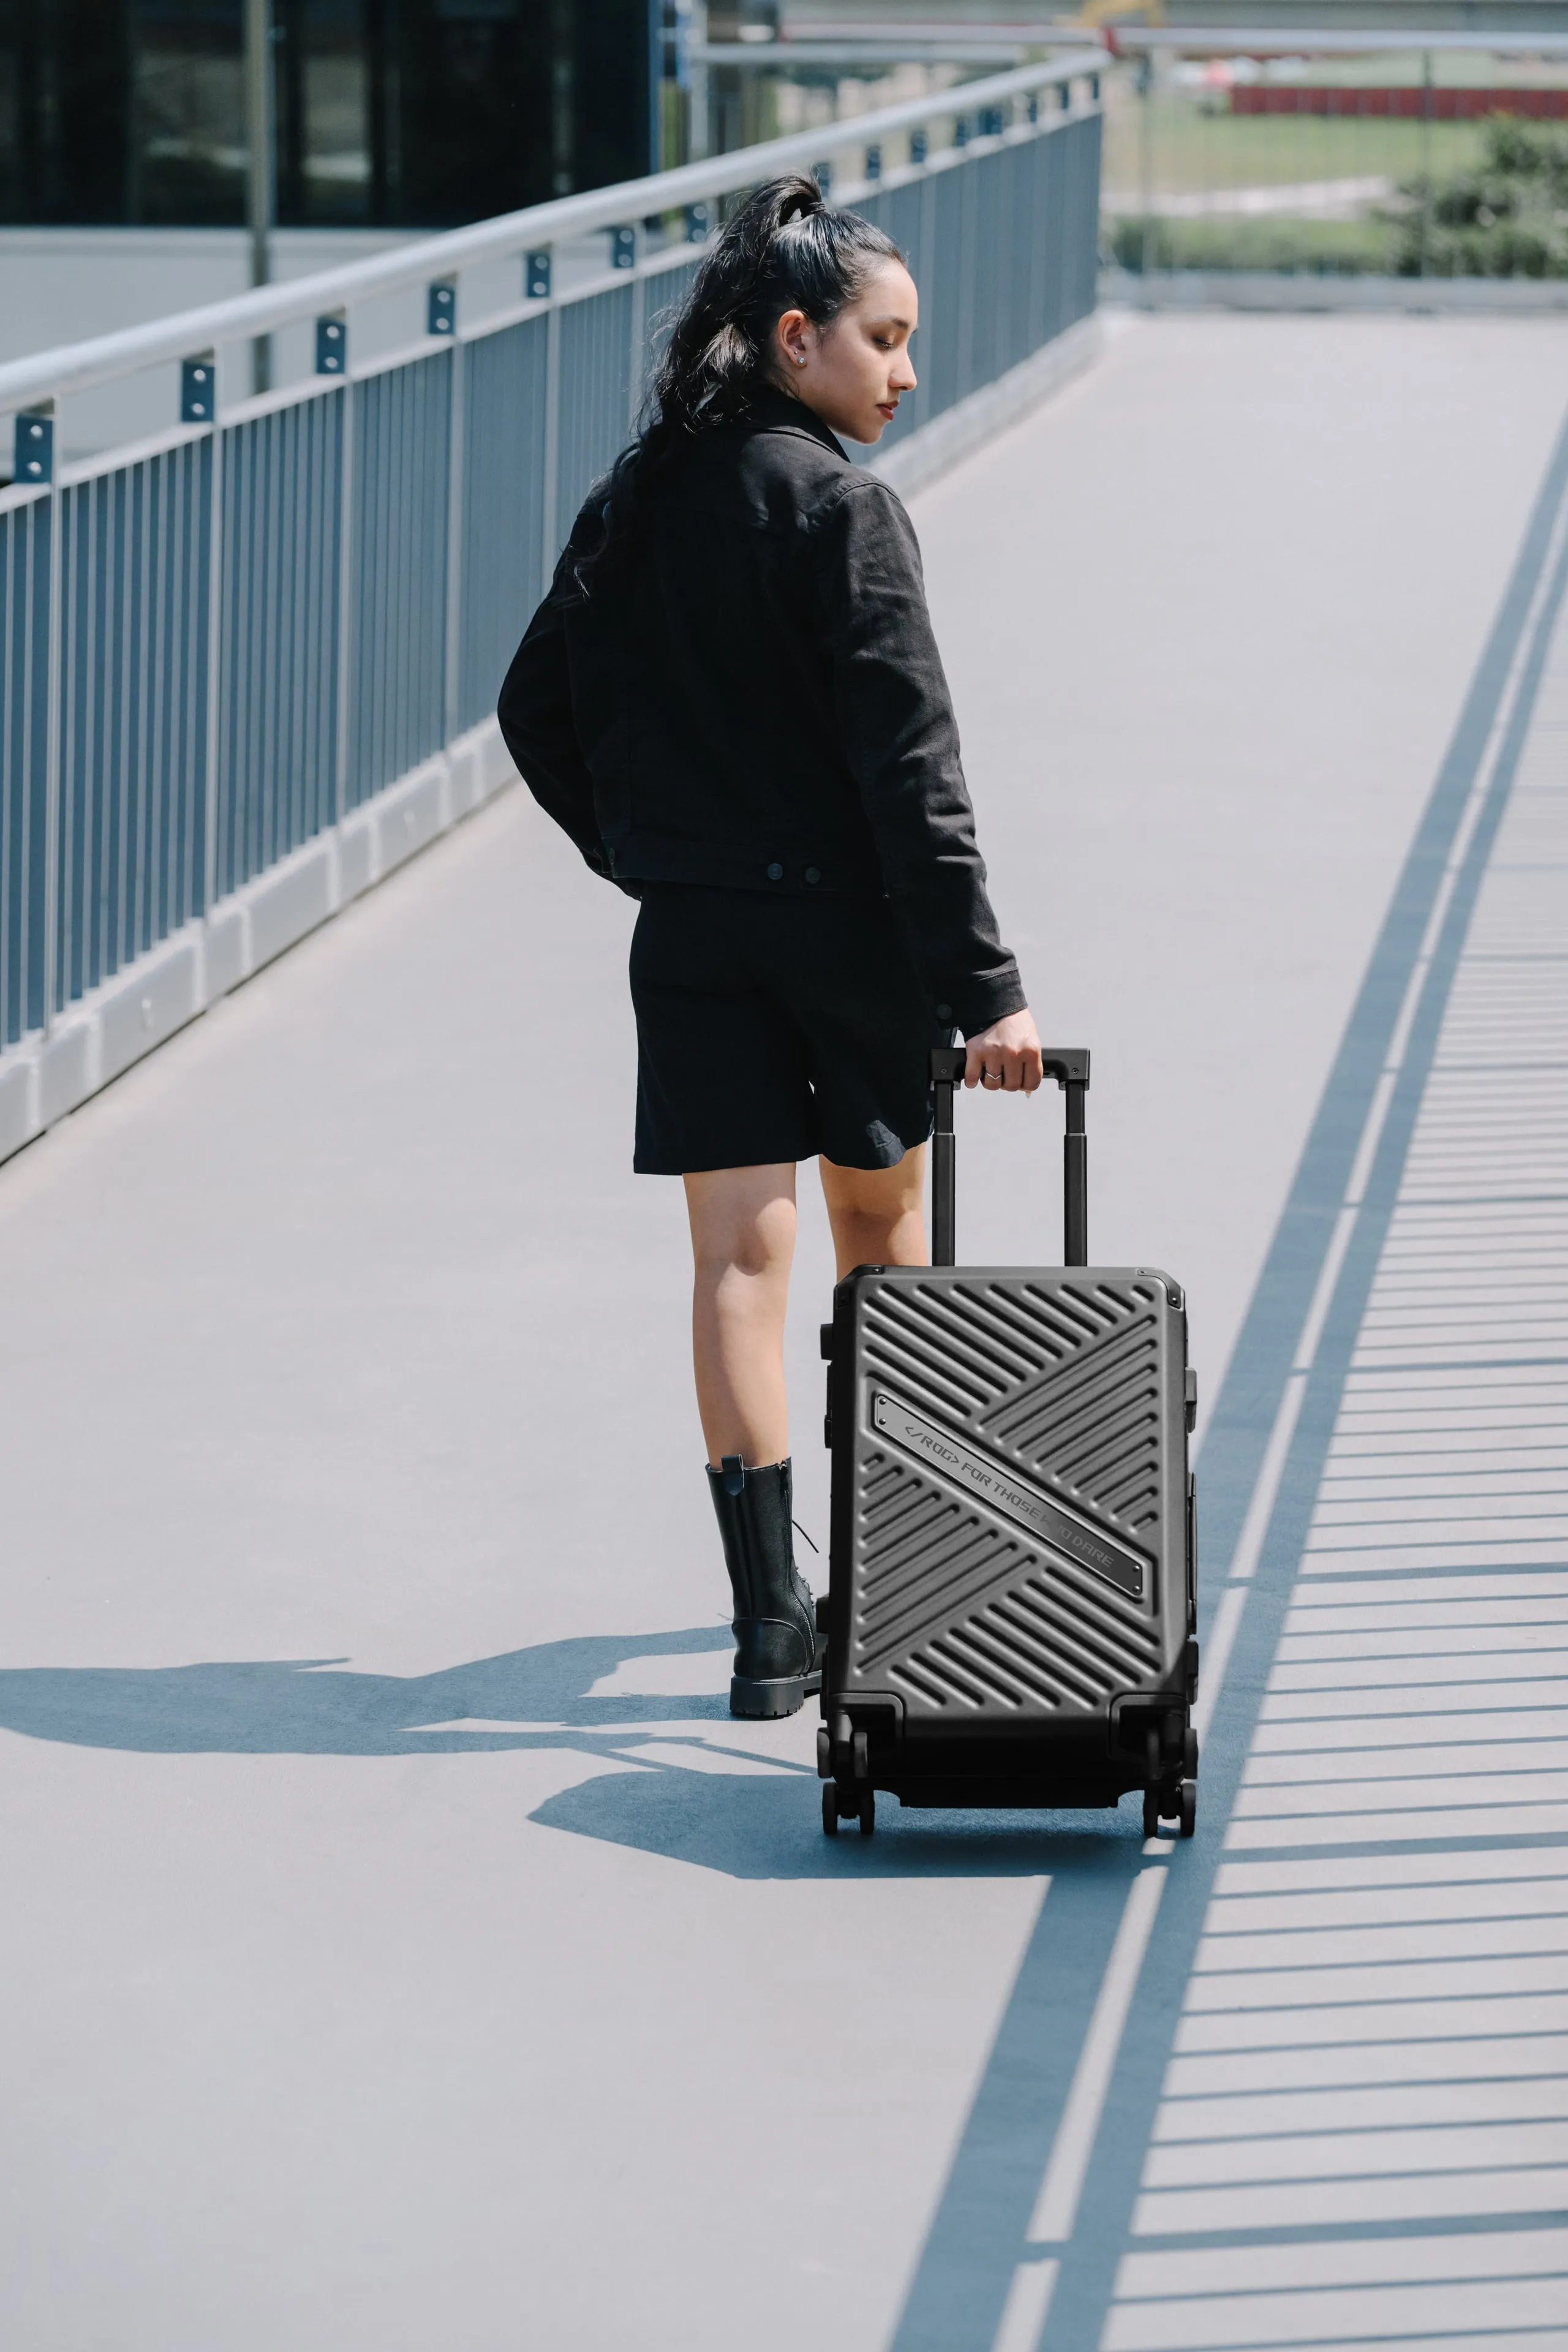 Woman traveling over a pedestrian bridge with the ROG SLASH Hard Case Luggage in tow